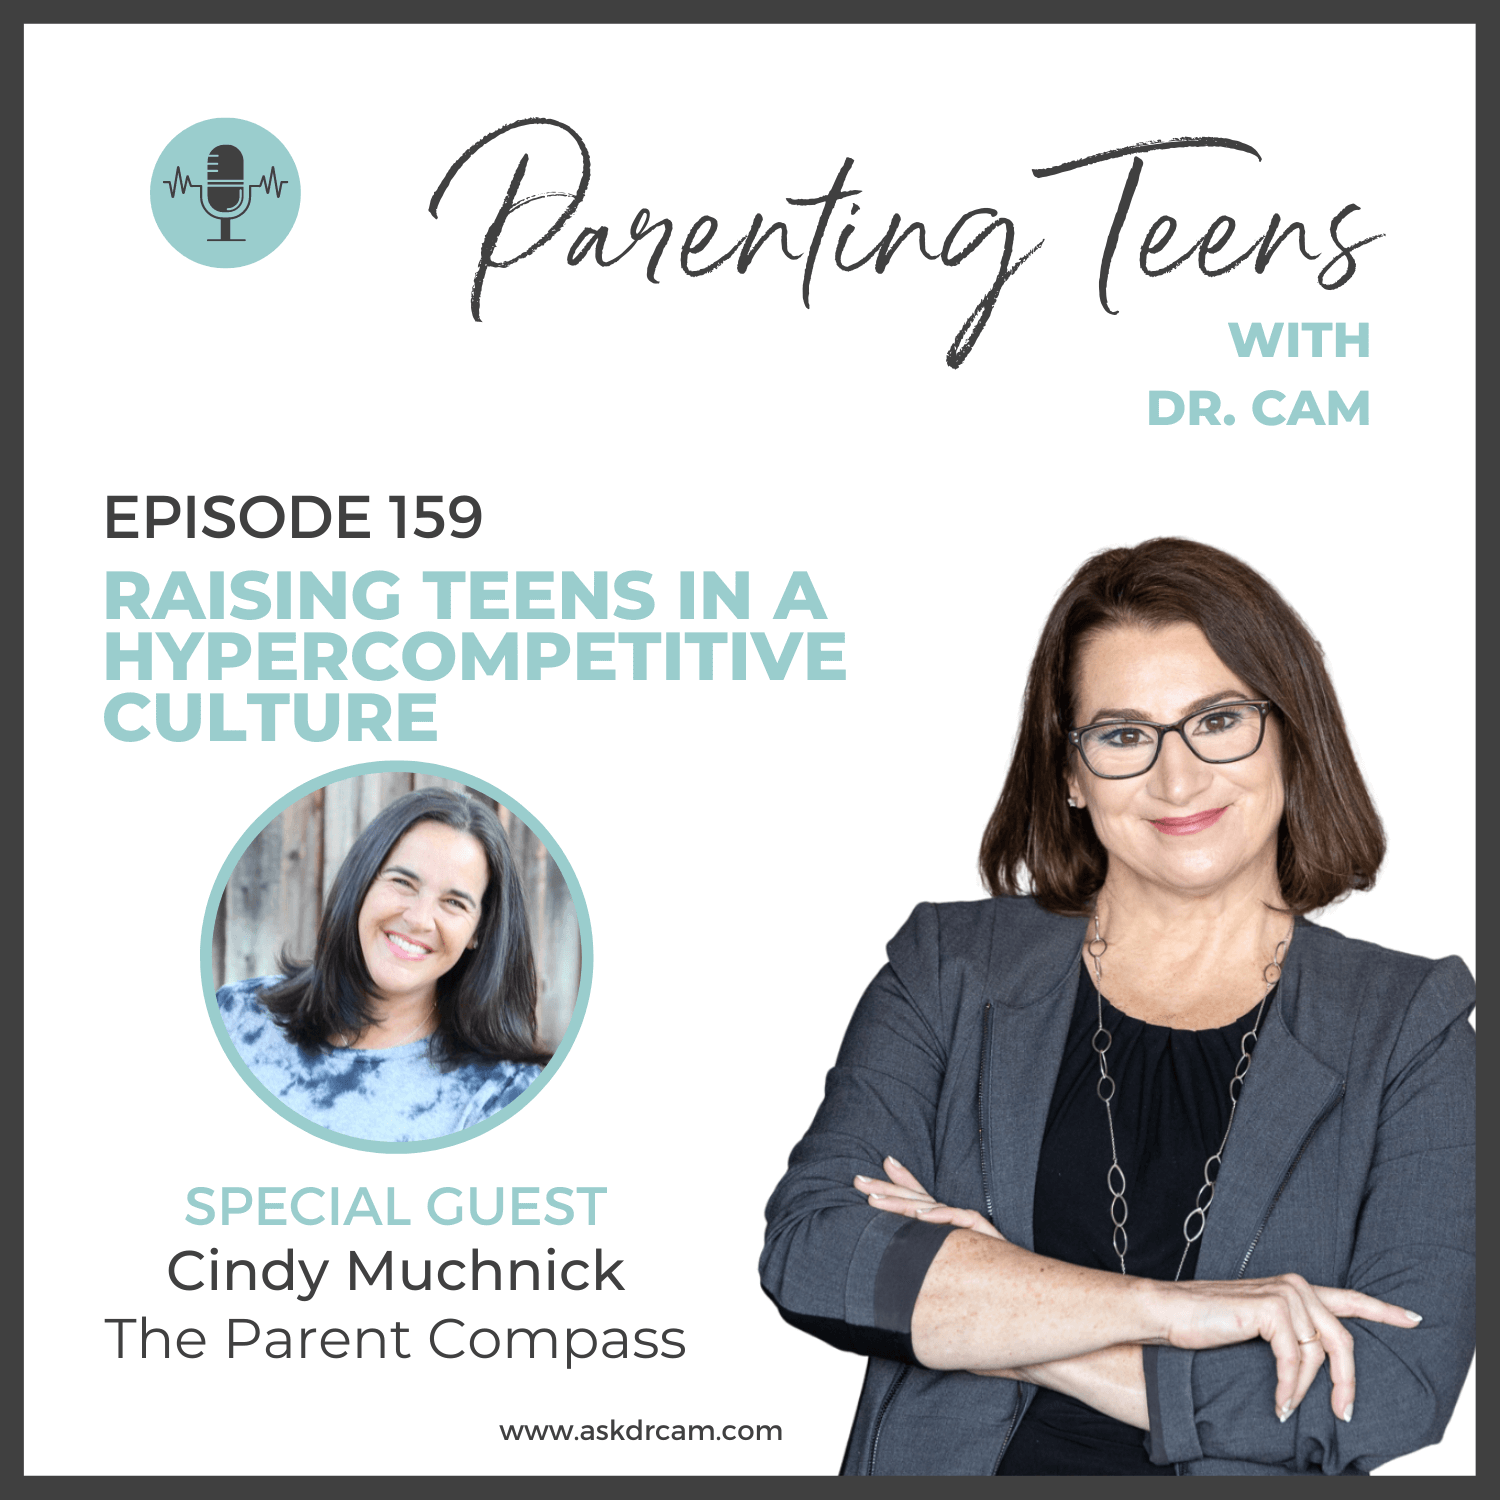 Raising Teens in a Hypercompetitive Culture with Cindy Muchnick